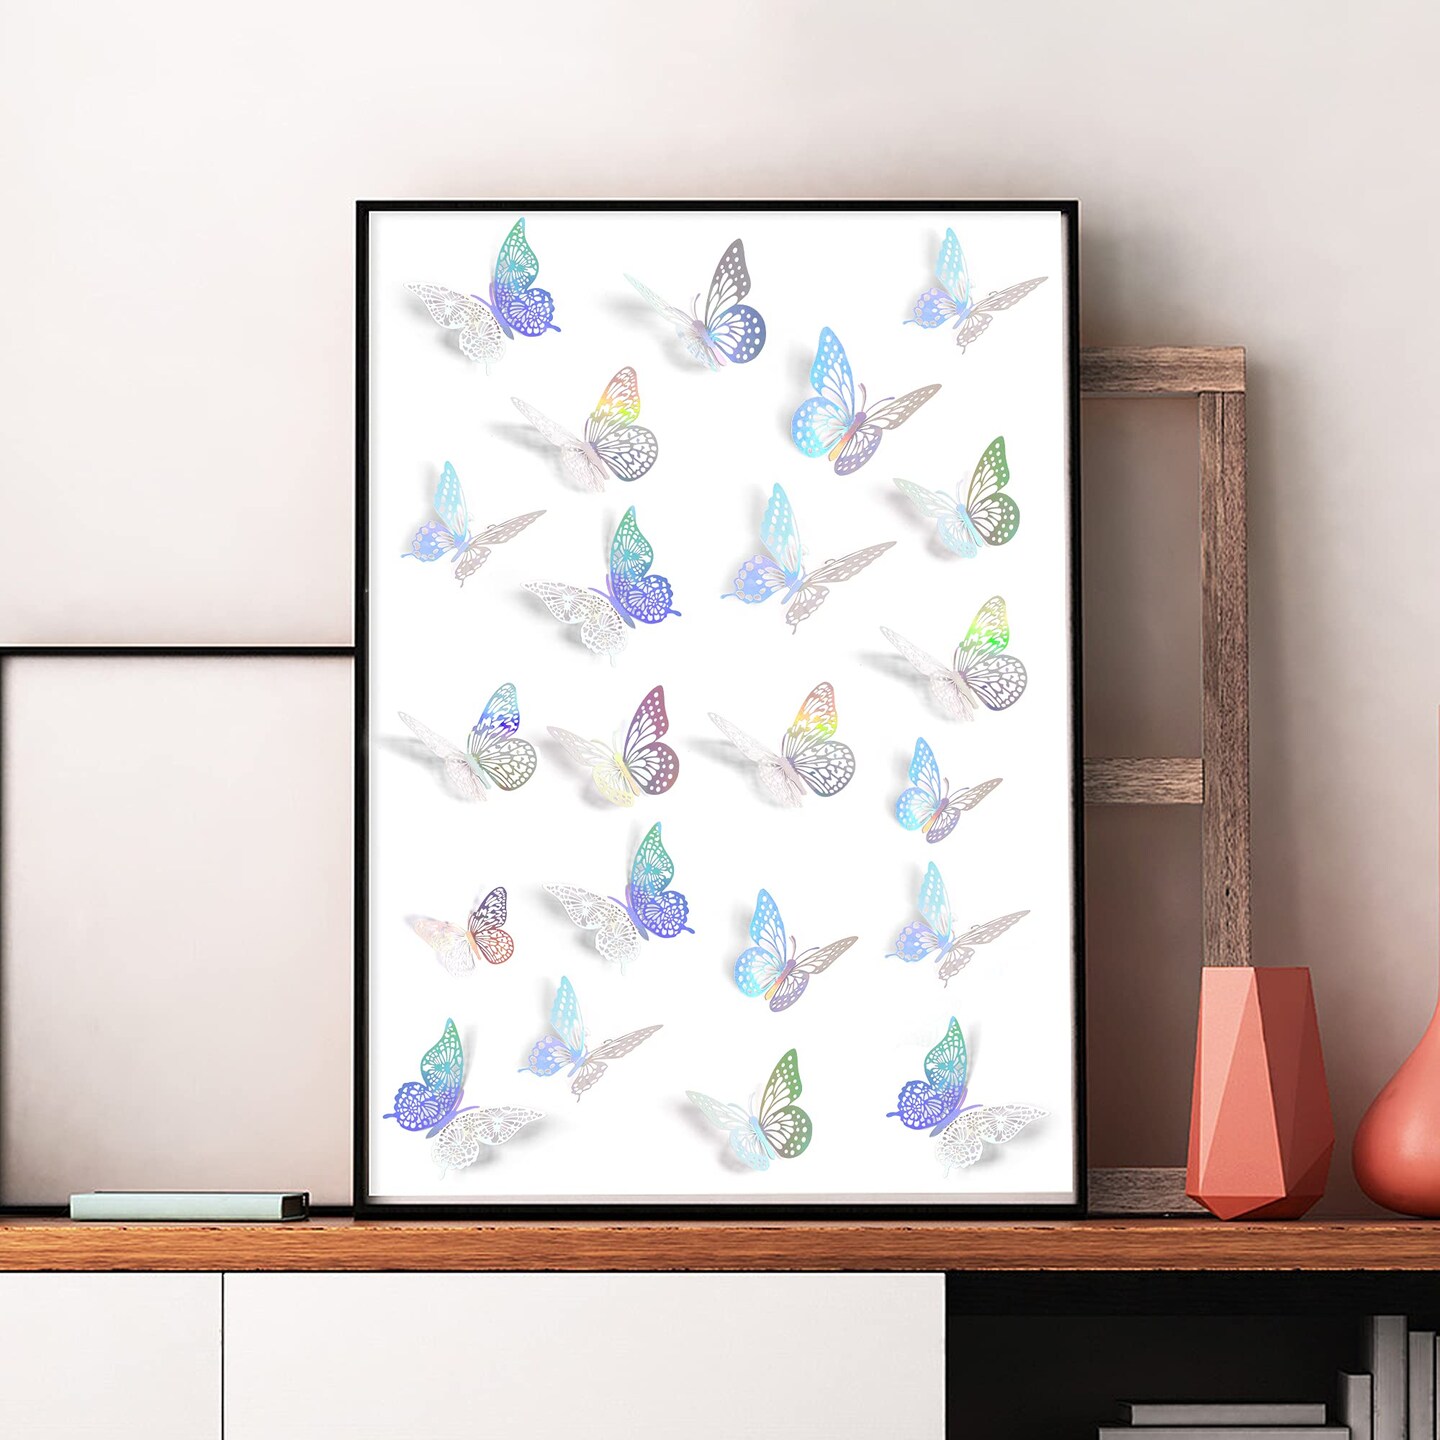 SAOROPEB 3D Butterfly Wall Decor, 72 Pcs 3 Styles 3 Sizes, Removable Metallic Wall Sticker Room Mural Decals for Kids Bedroom Nursery Classroom Party Decoration Wedding Decor DIY Gift (Laser)